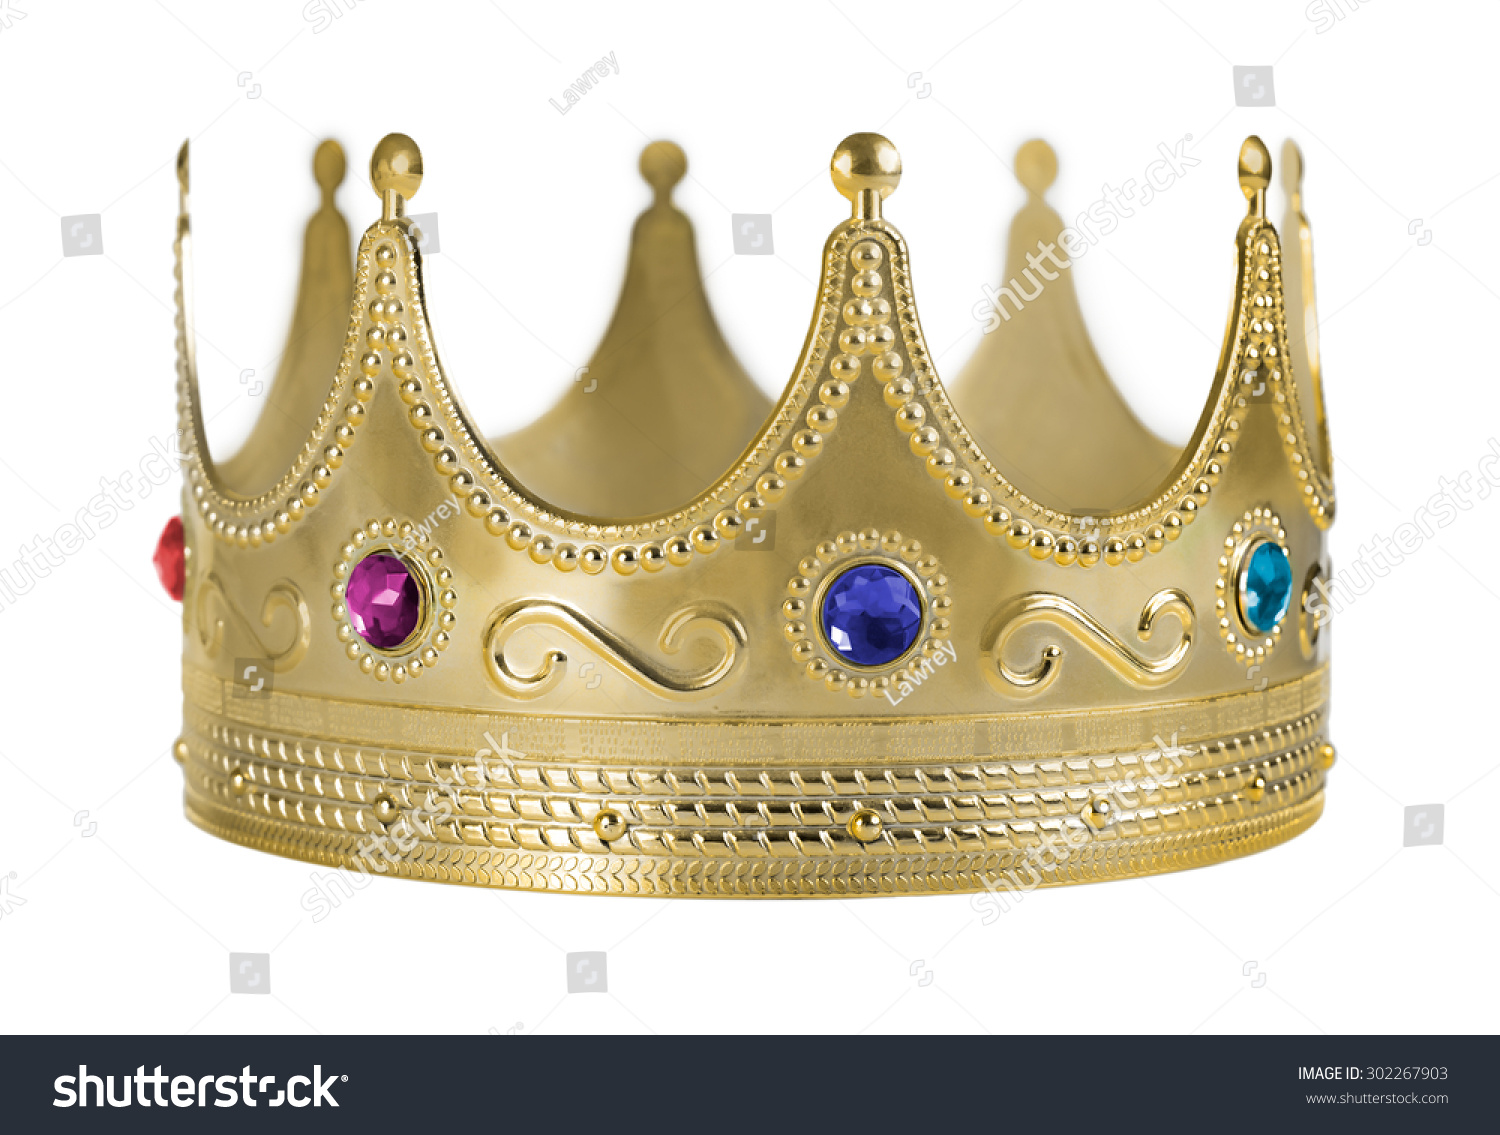 Golden crown replica with gem stones isolated on white background. #302267903